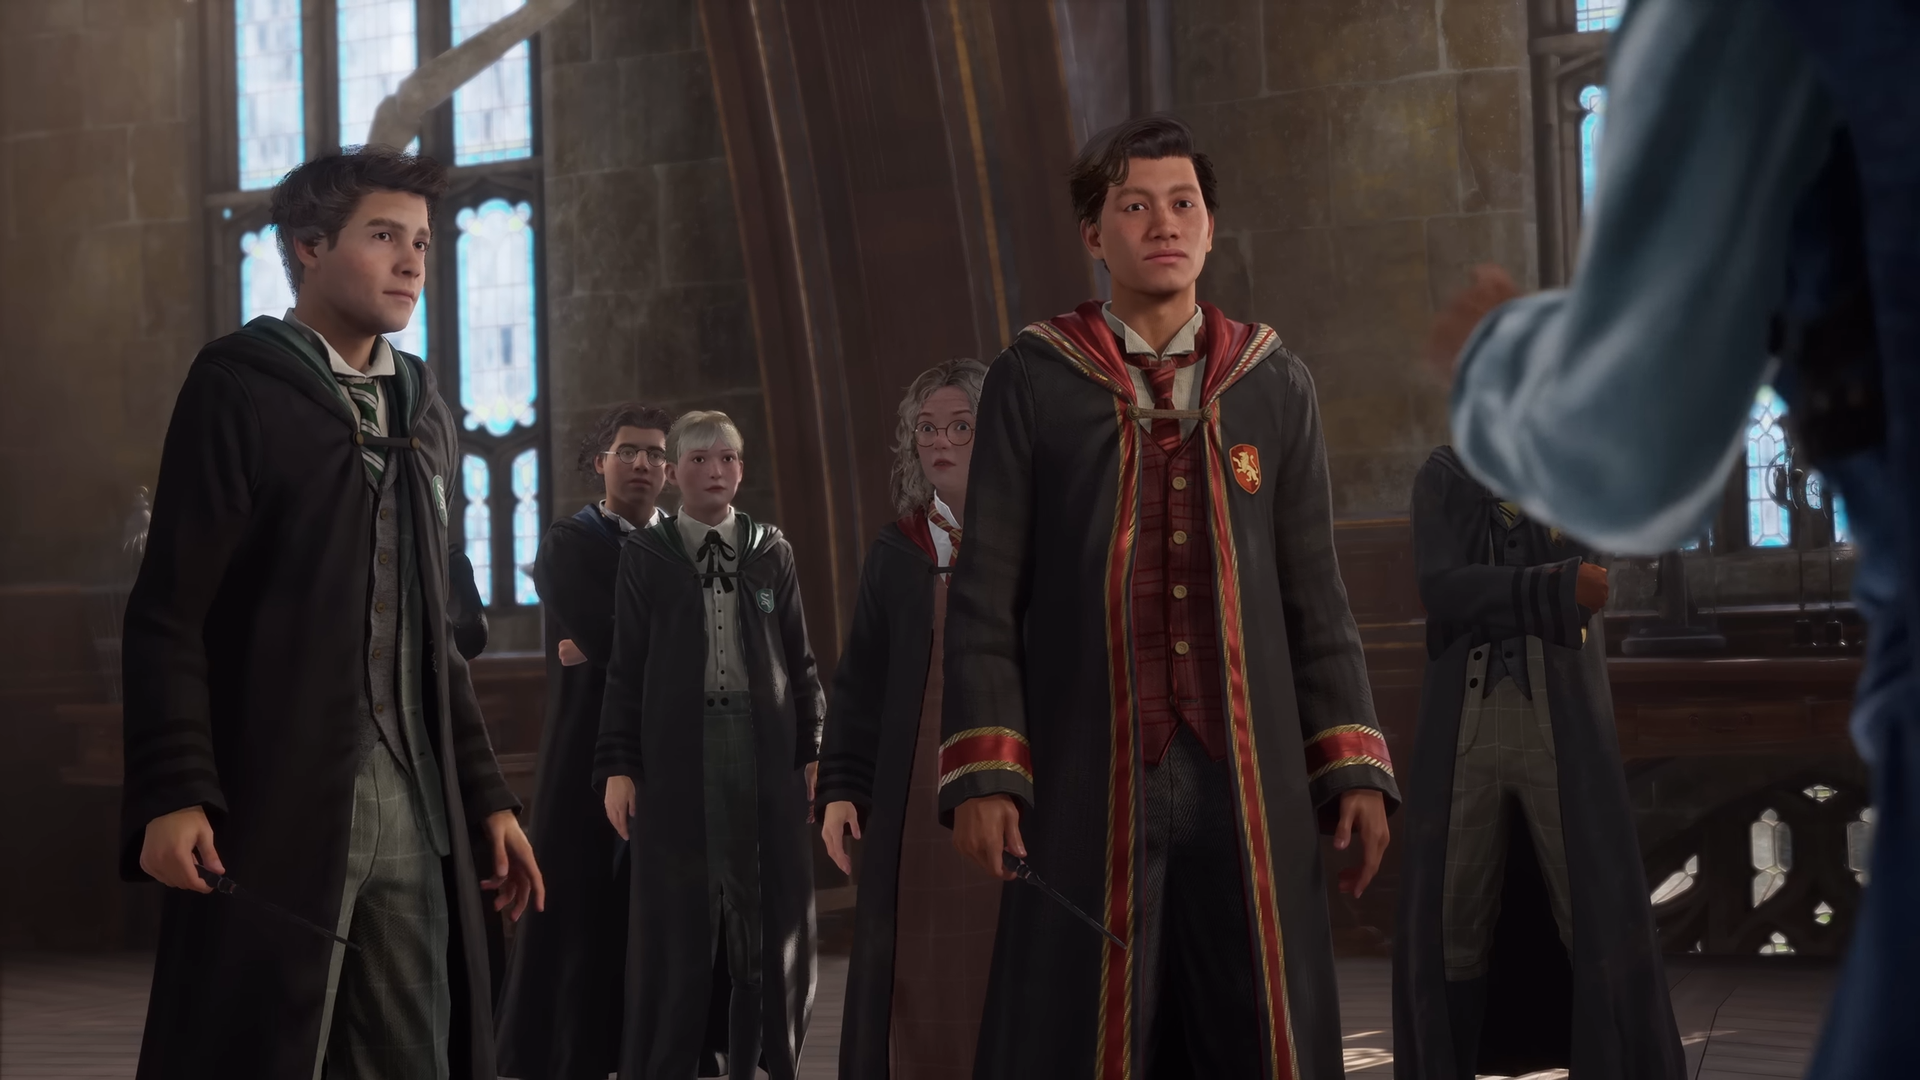 In Hogwarts Legacy Sebastian Sallow questline, a male student from Slytherin House, Sebastian Sallow comes from a difficult family whose secret has not yet been exposed in the game